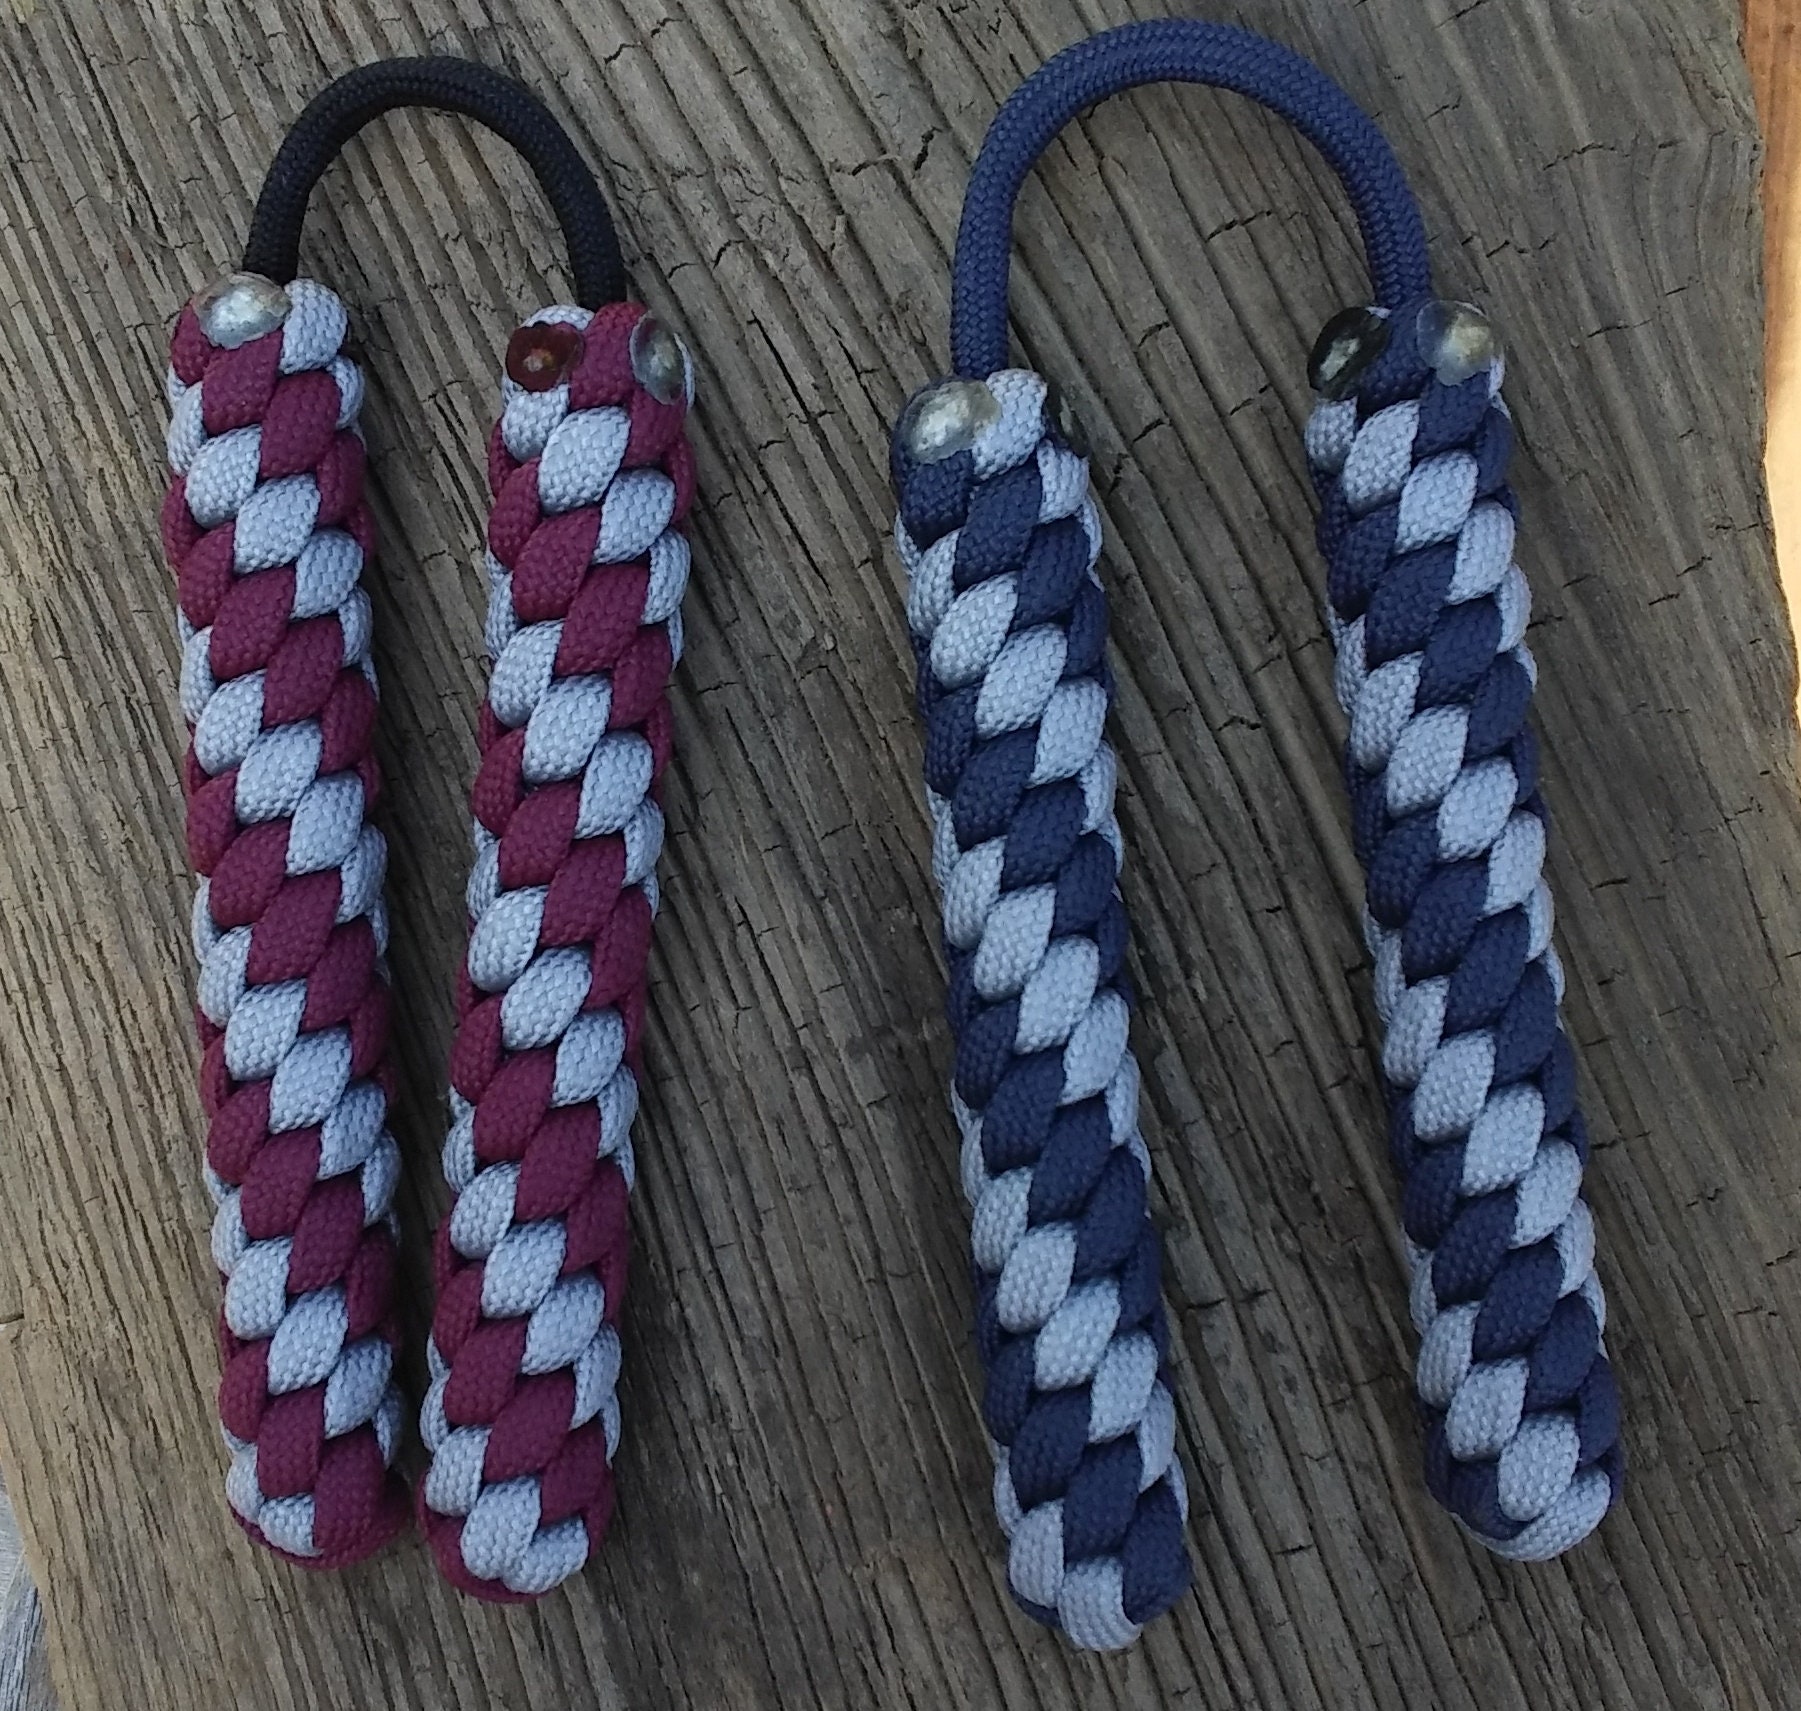 Paracord Fidget Toys, Paracord Chucks, Mini Chucks, Mini Nunchucks, Fidget  Toy, Paracord Nunchucks Focus Tool Fathers Day Gift Gifts for Dad -   Canada